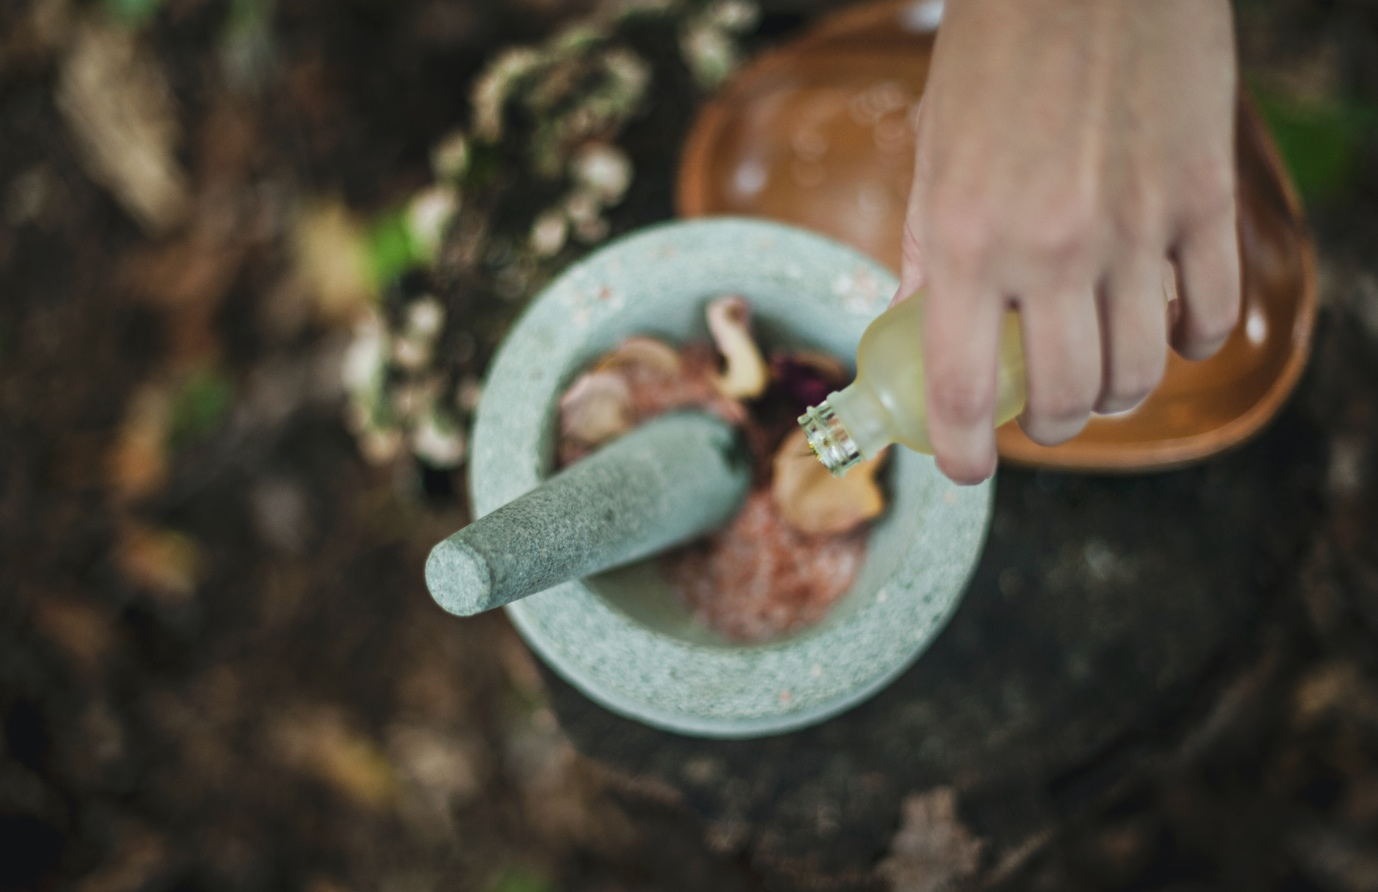 A herbalist mixing and crushing natural herbal ingredients to use for a medical treatment: Doctor of Naturopathy